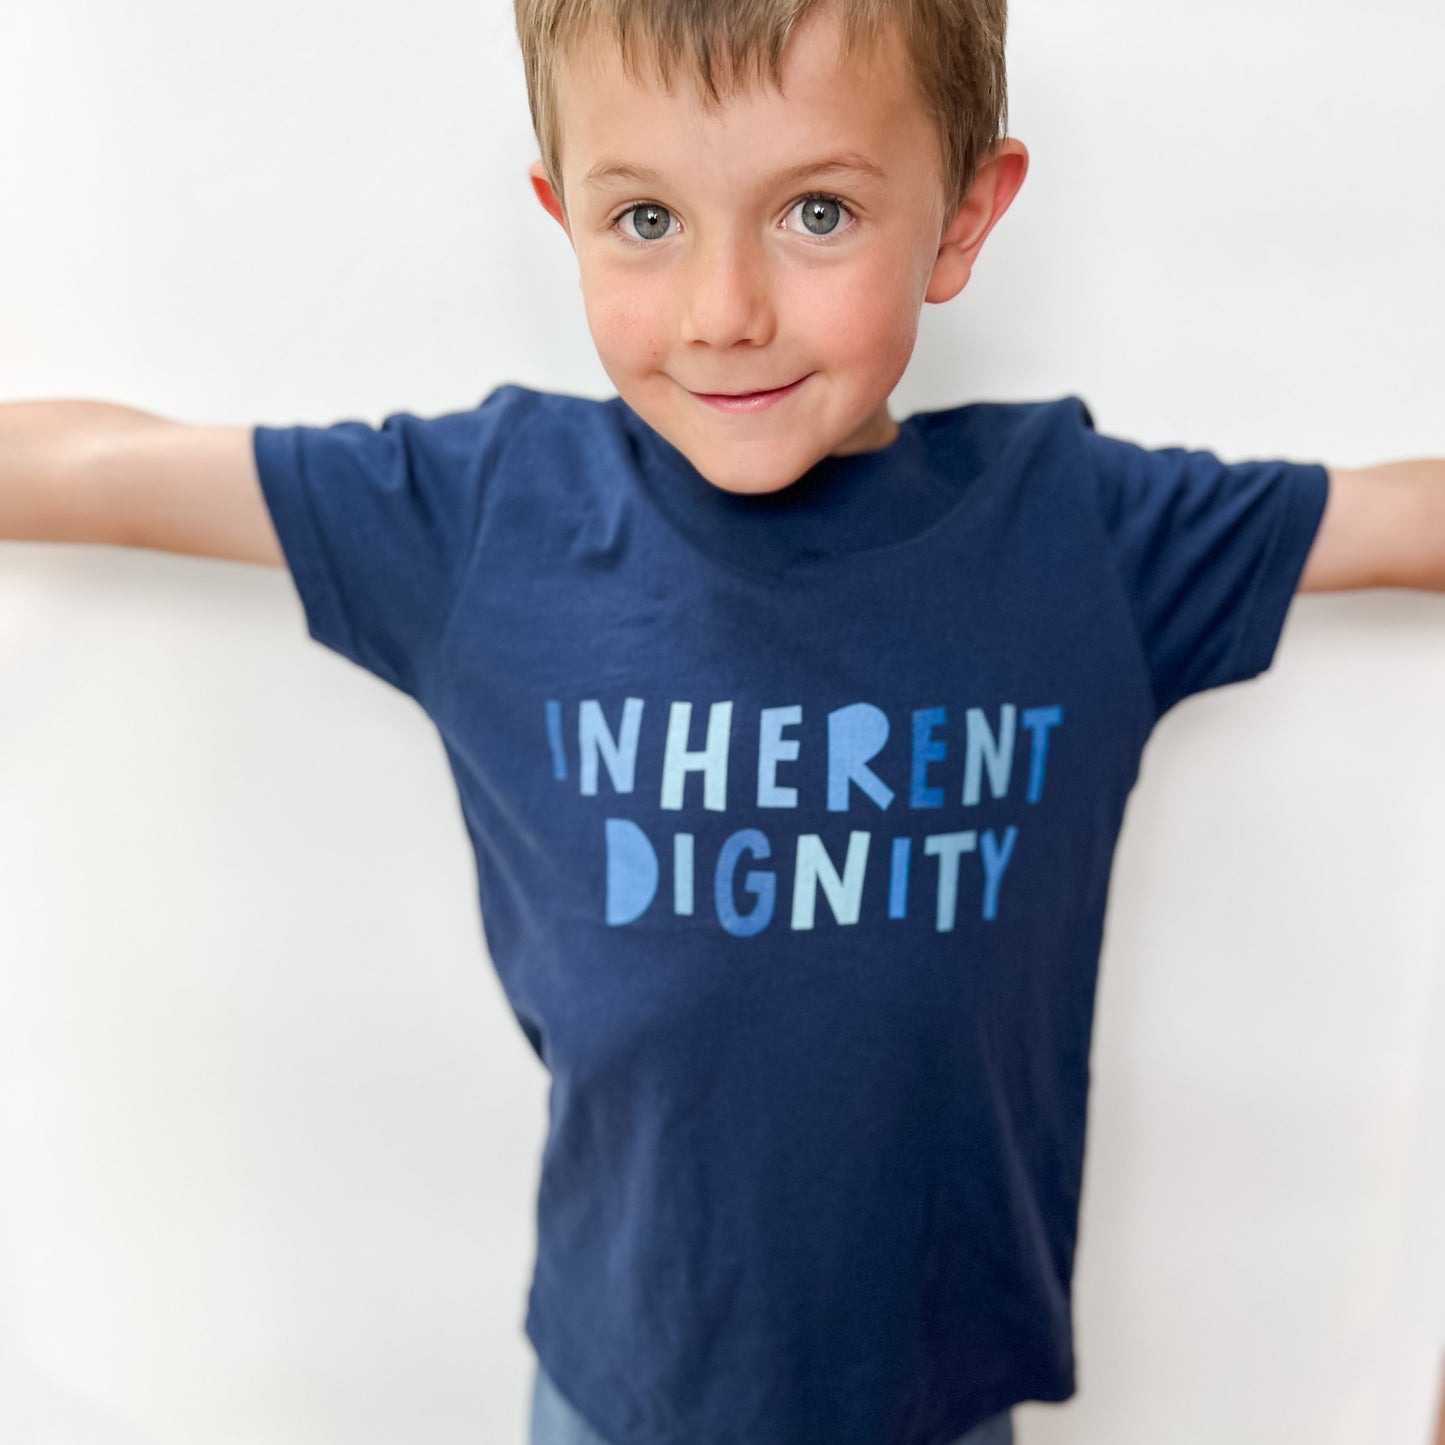 Inherent Dignity Toddler and Youth T-Shirt